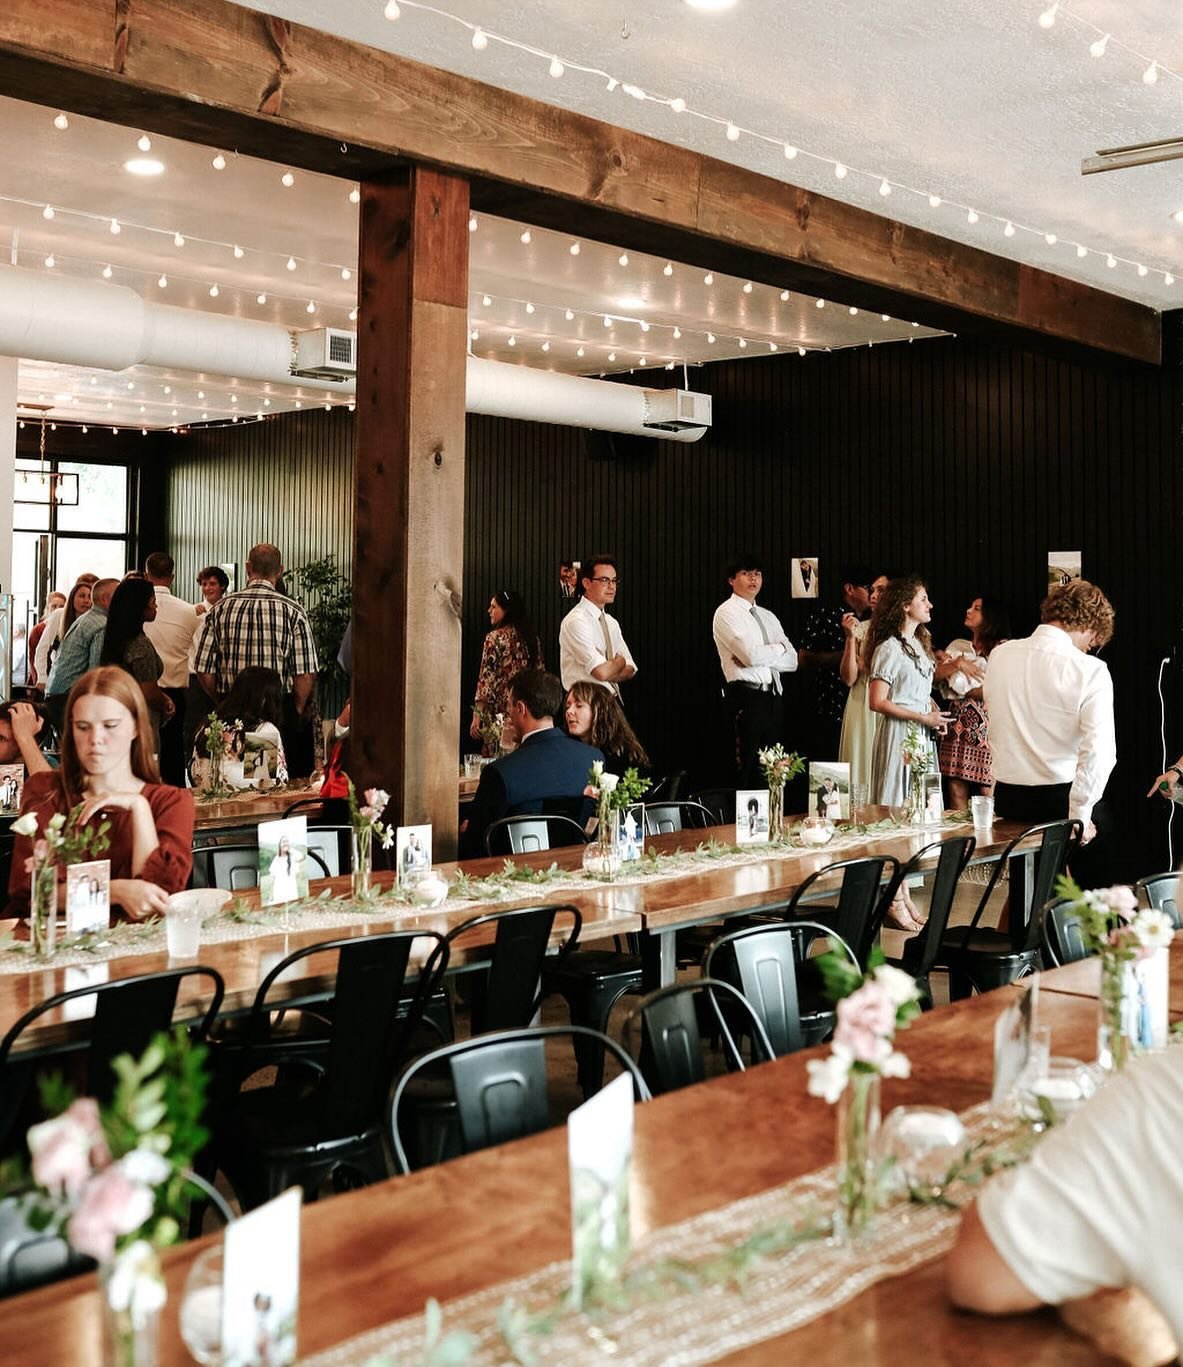 There's nothing quite like seeing our venue come alive with friends and family for a memorable day💛

📸: @kileyfriendcaptures 

#utahweddingvenue #weddinginspo #weddingvenue #utahweddingphotographer #utahwedding #utahcountywedding #utahbride #utahwe